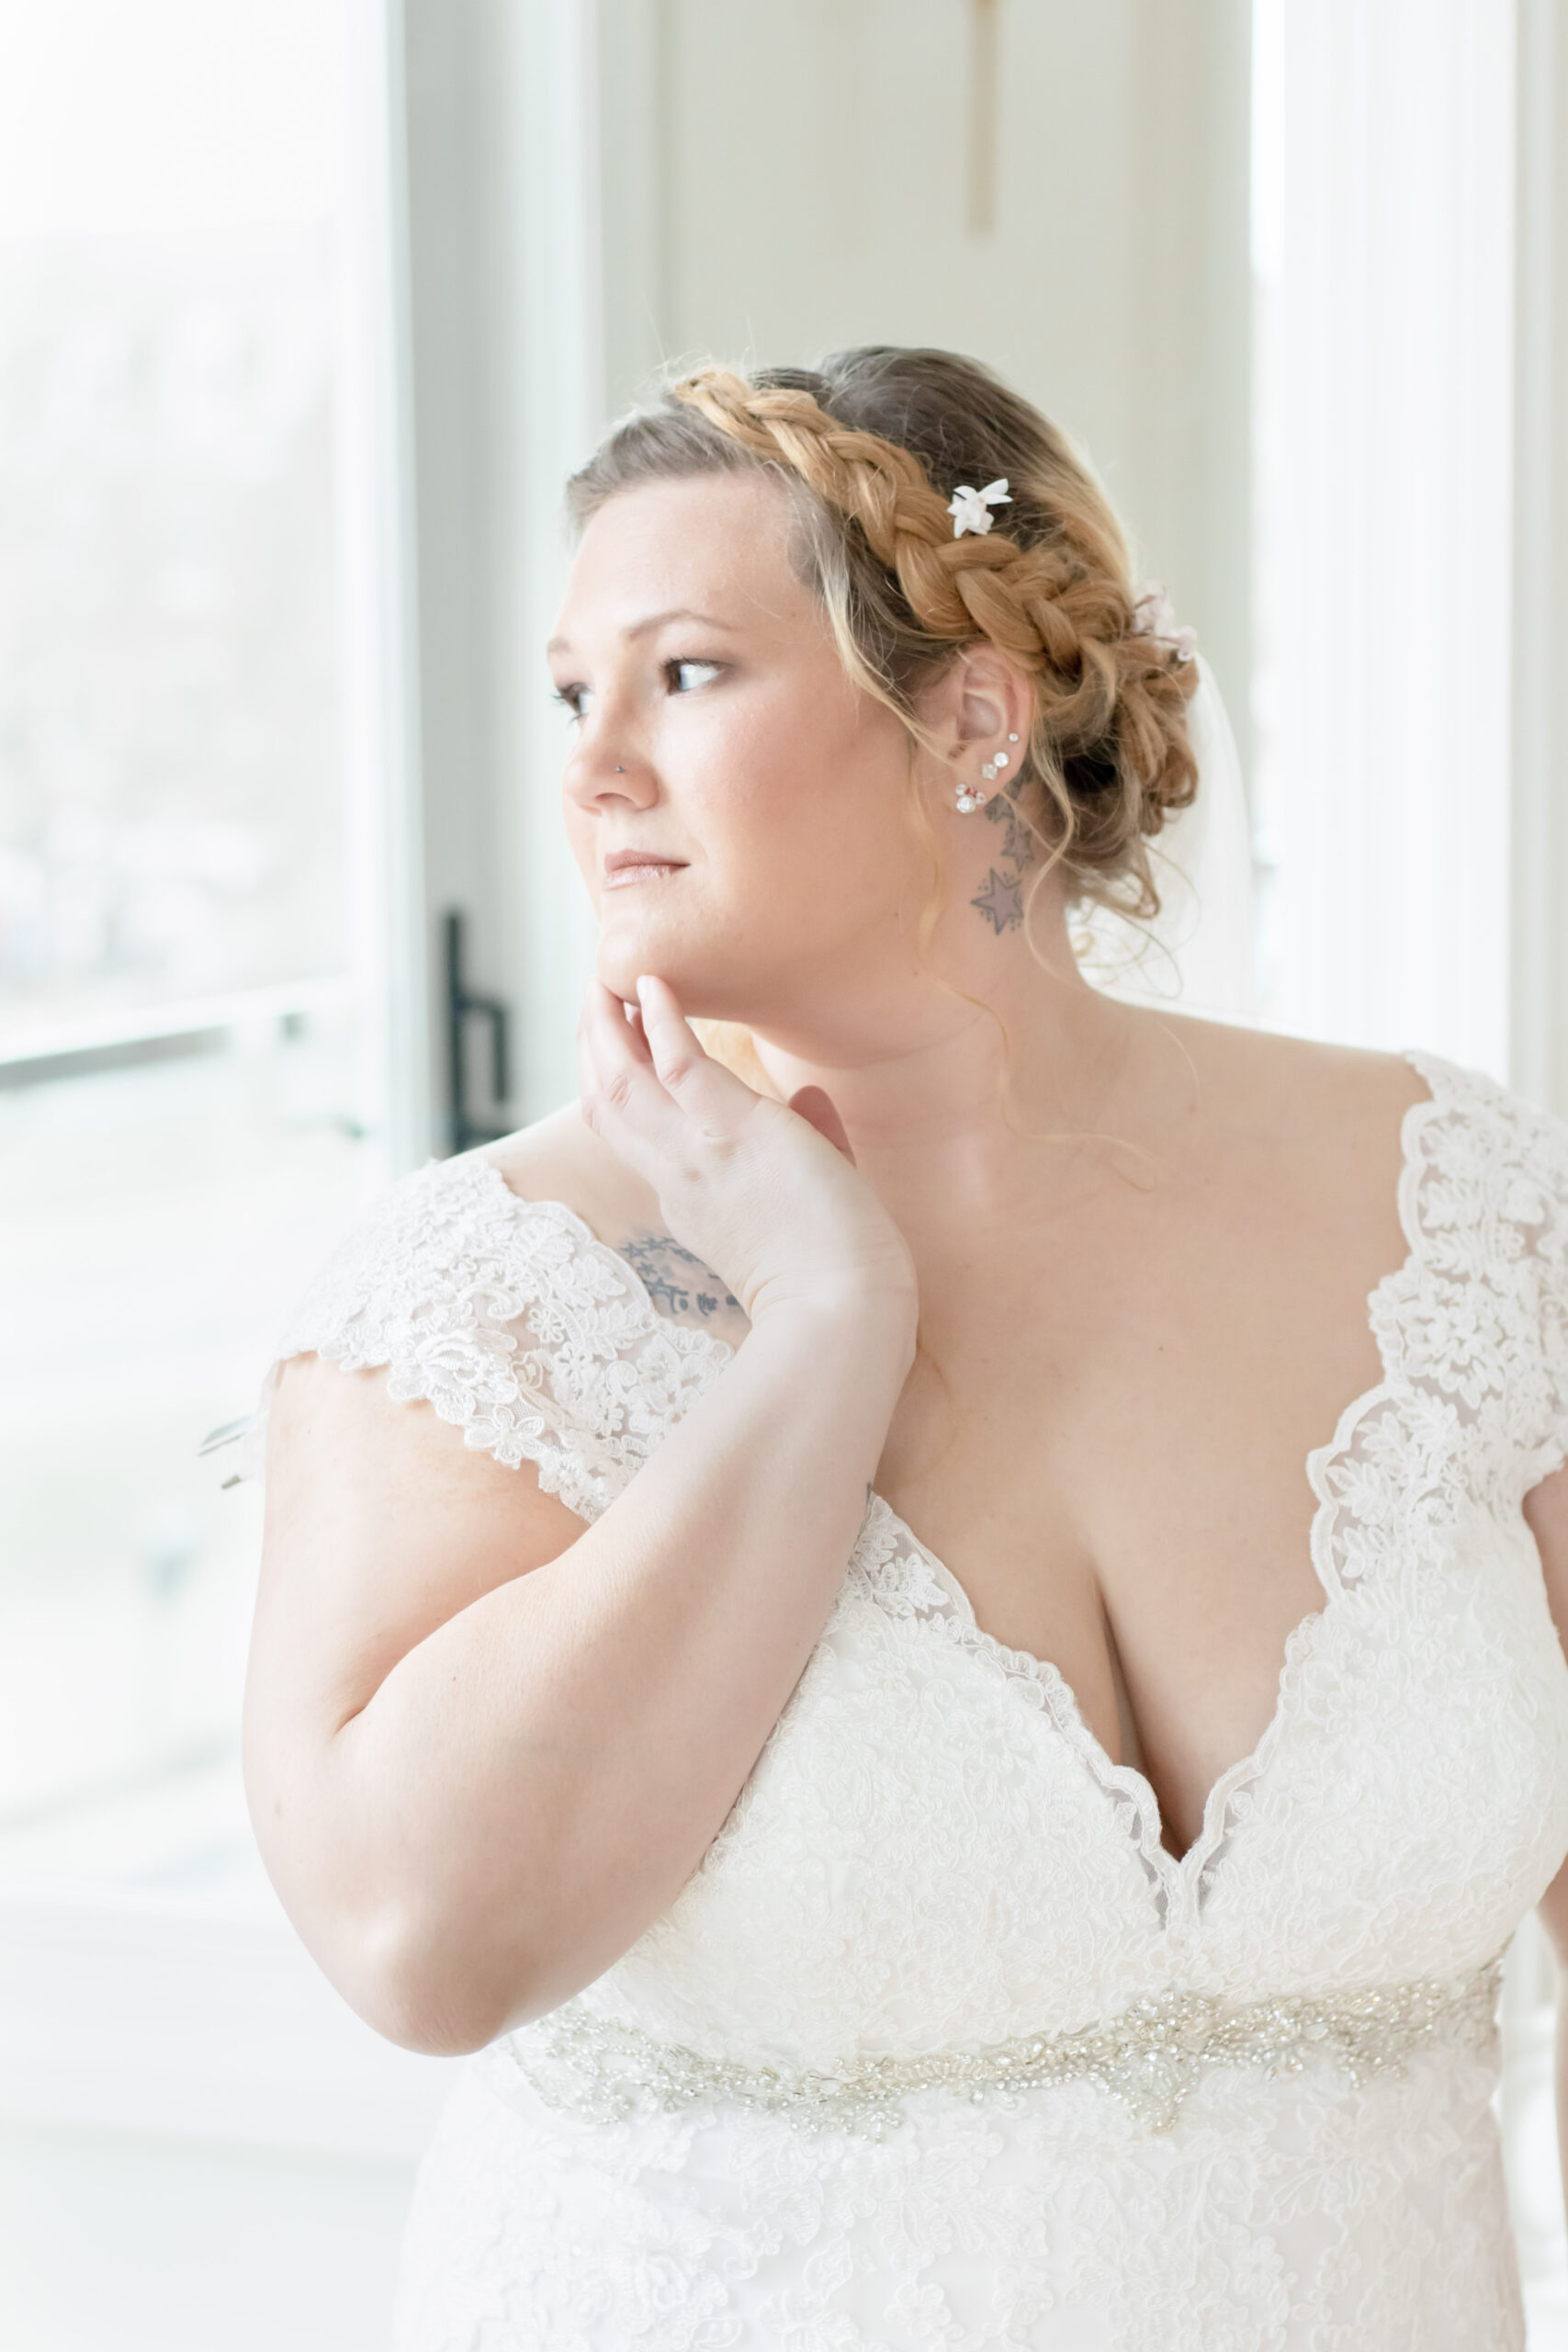 How To Make Sure You Look Your Best In Your Wedding Photos